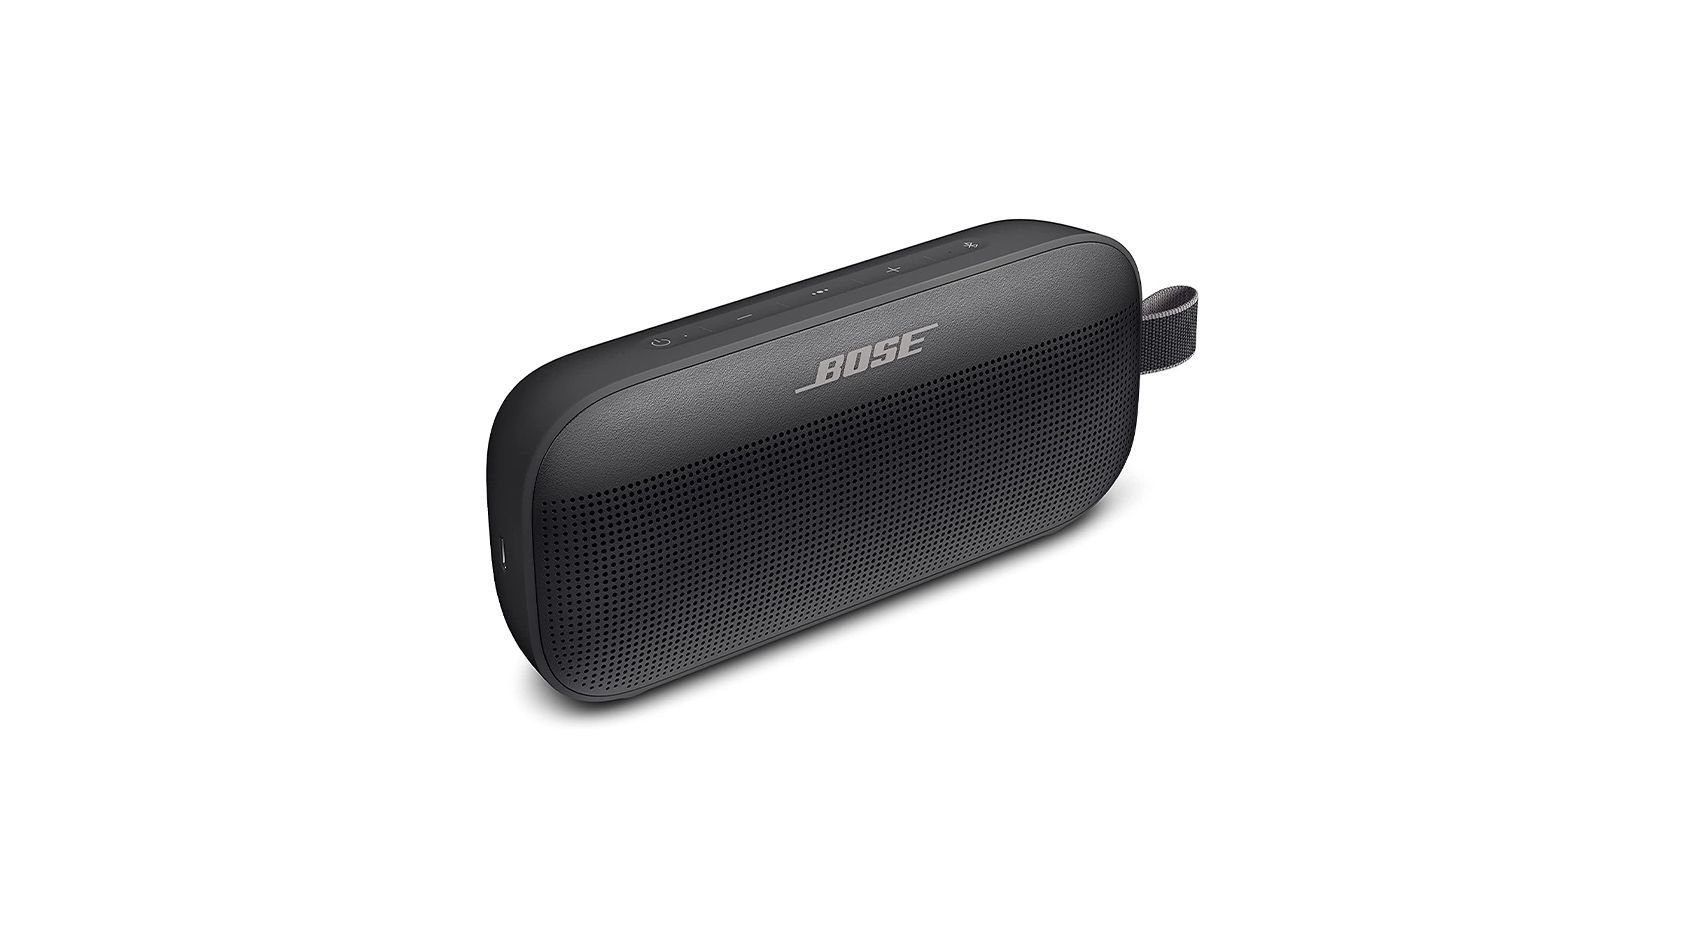 Bose Bluetooth speaker deals start at $99 right now